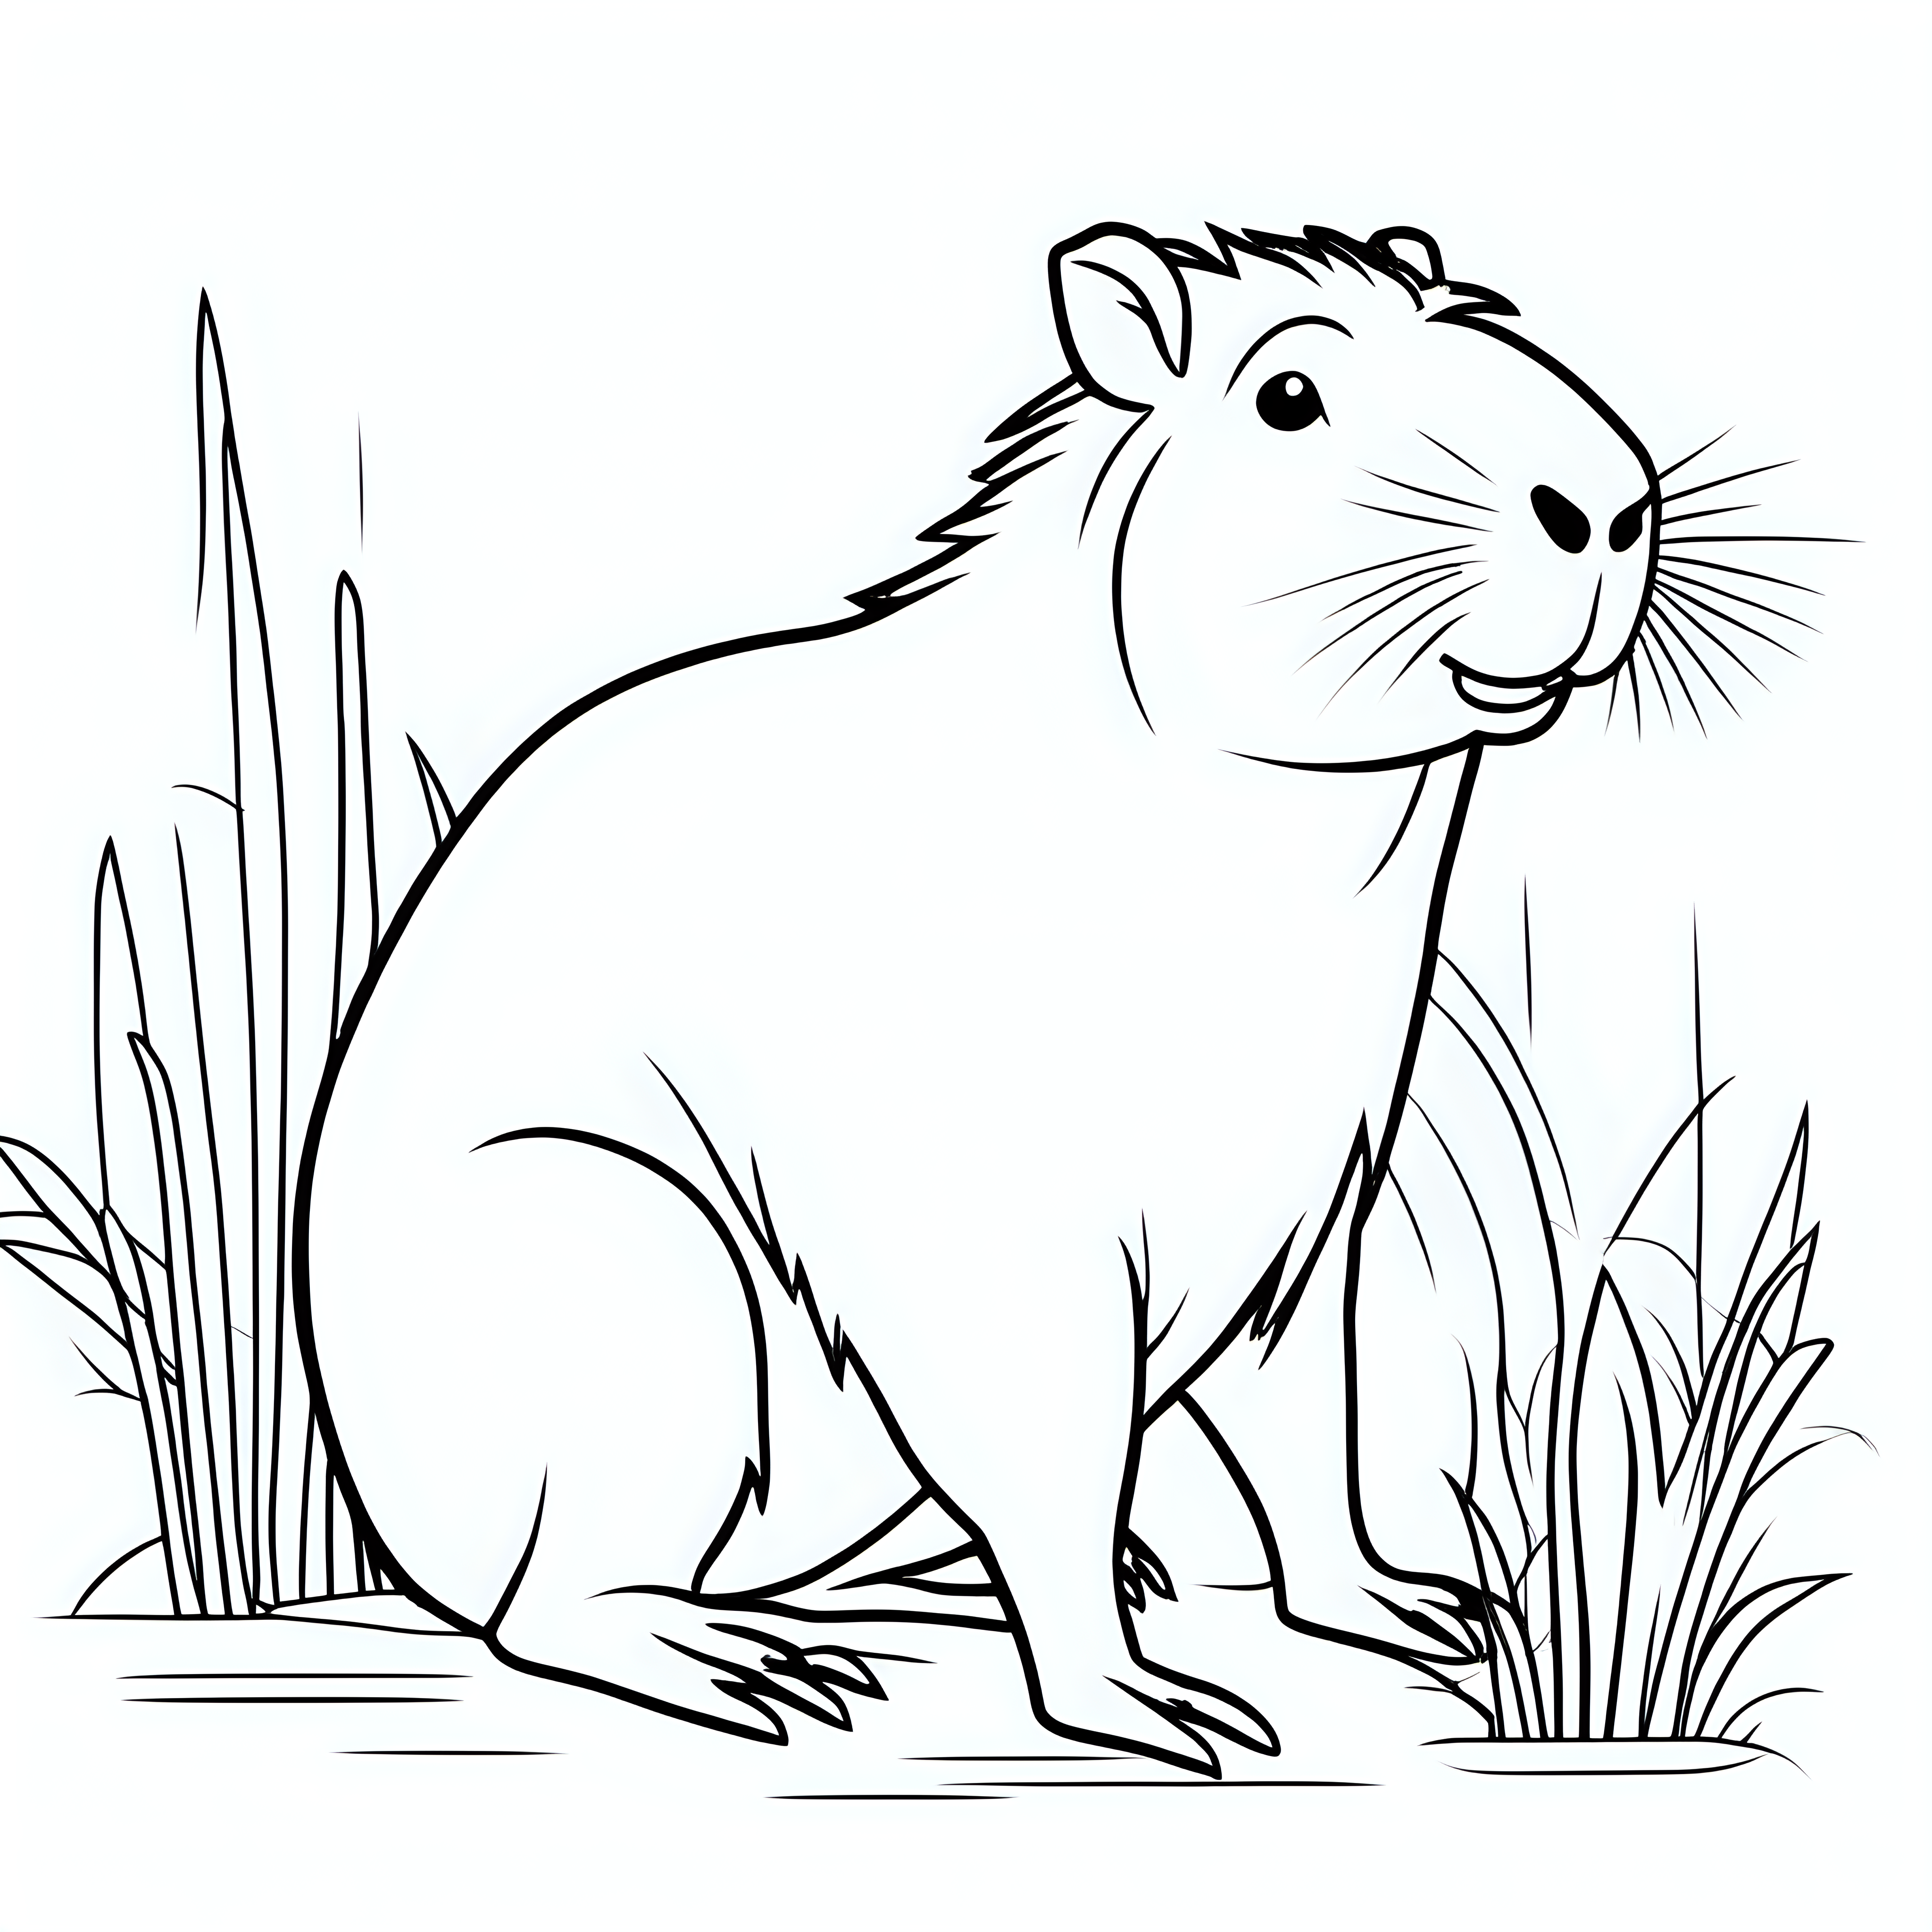 draw a cute capybara with only the outline in black for a coloring book for kids